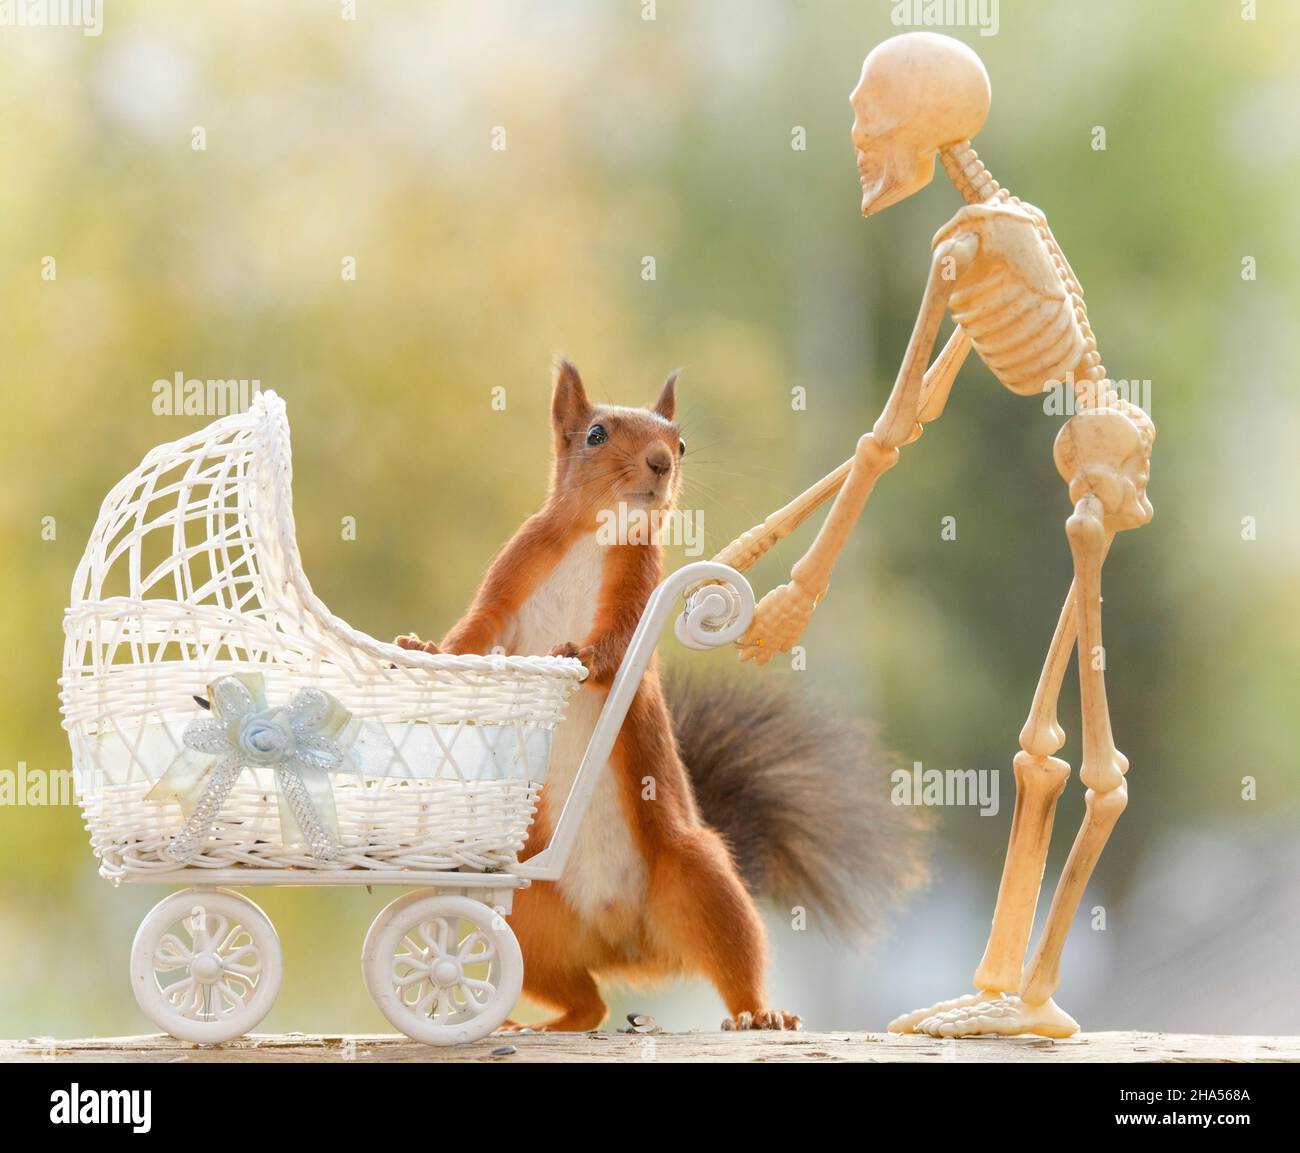 skeleton with a stroller and red squirrel with it Stock Photo